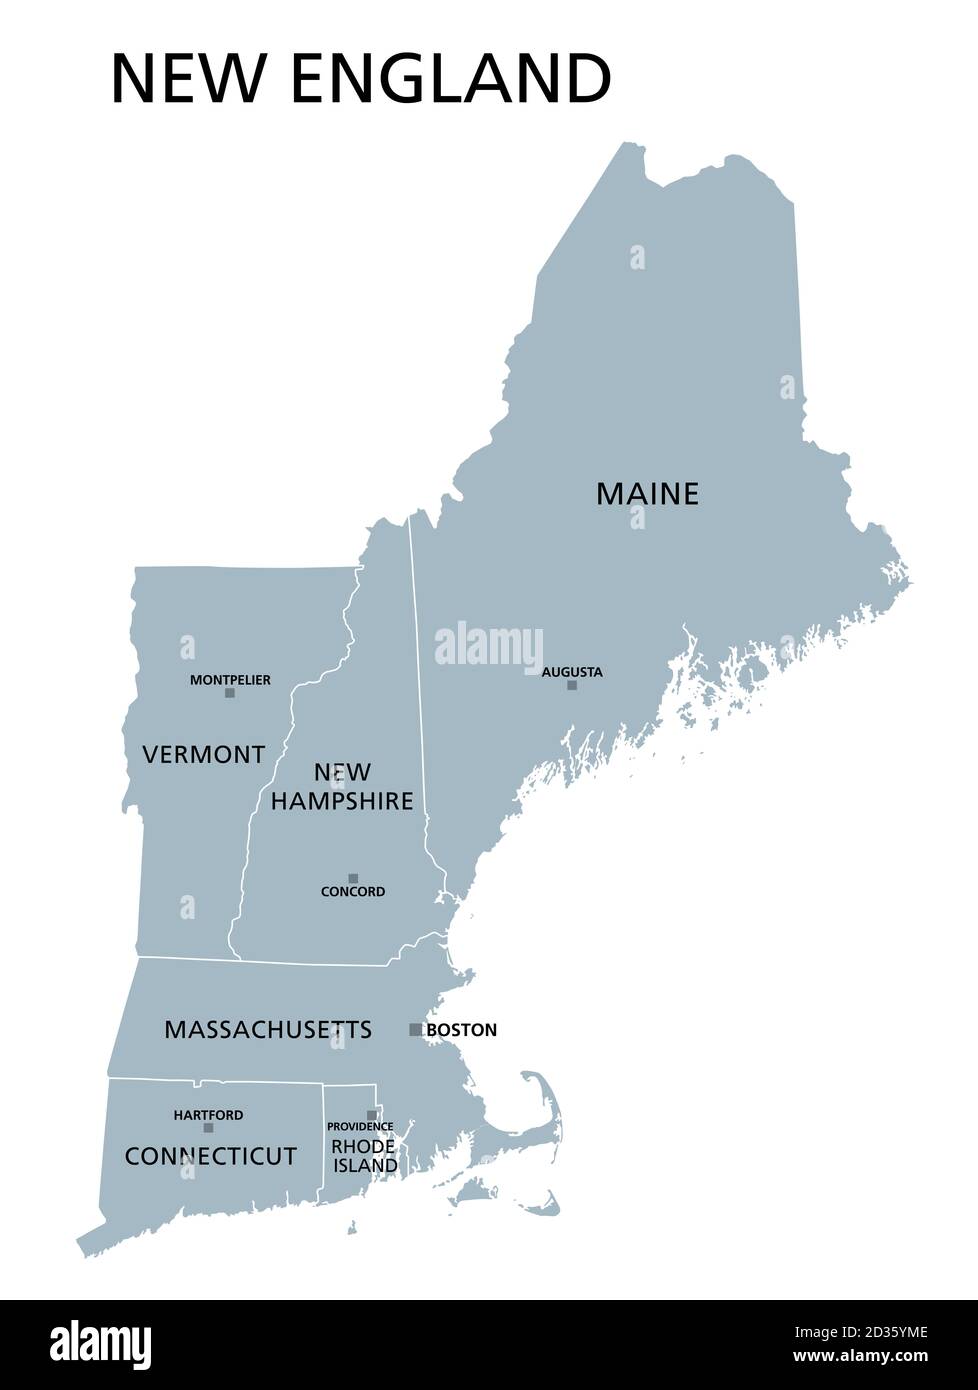 New England region of the United States, gray political map. The six states Maine, Vermont, New Hampshire, Massachusetts, Rhode Island and Connecticut Stock Photo